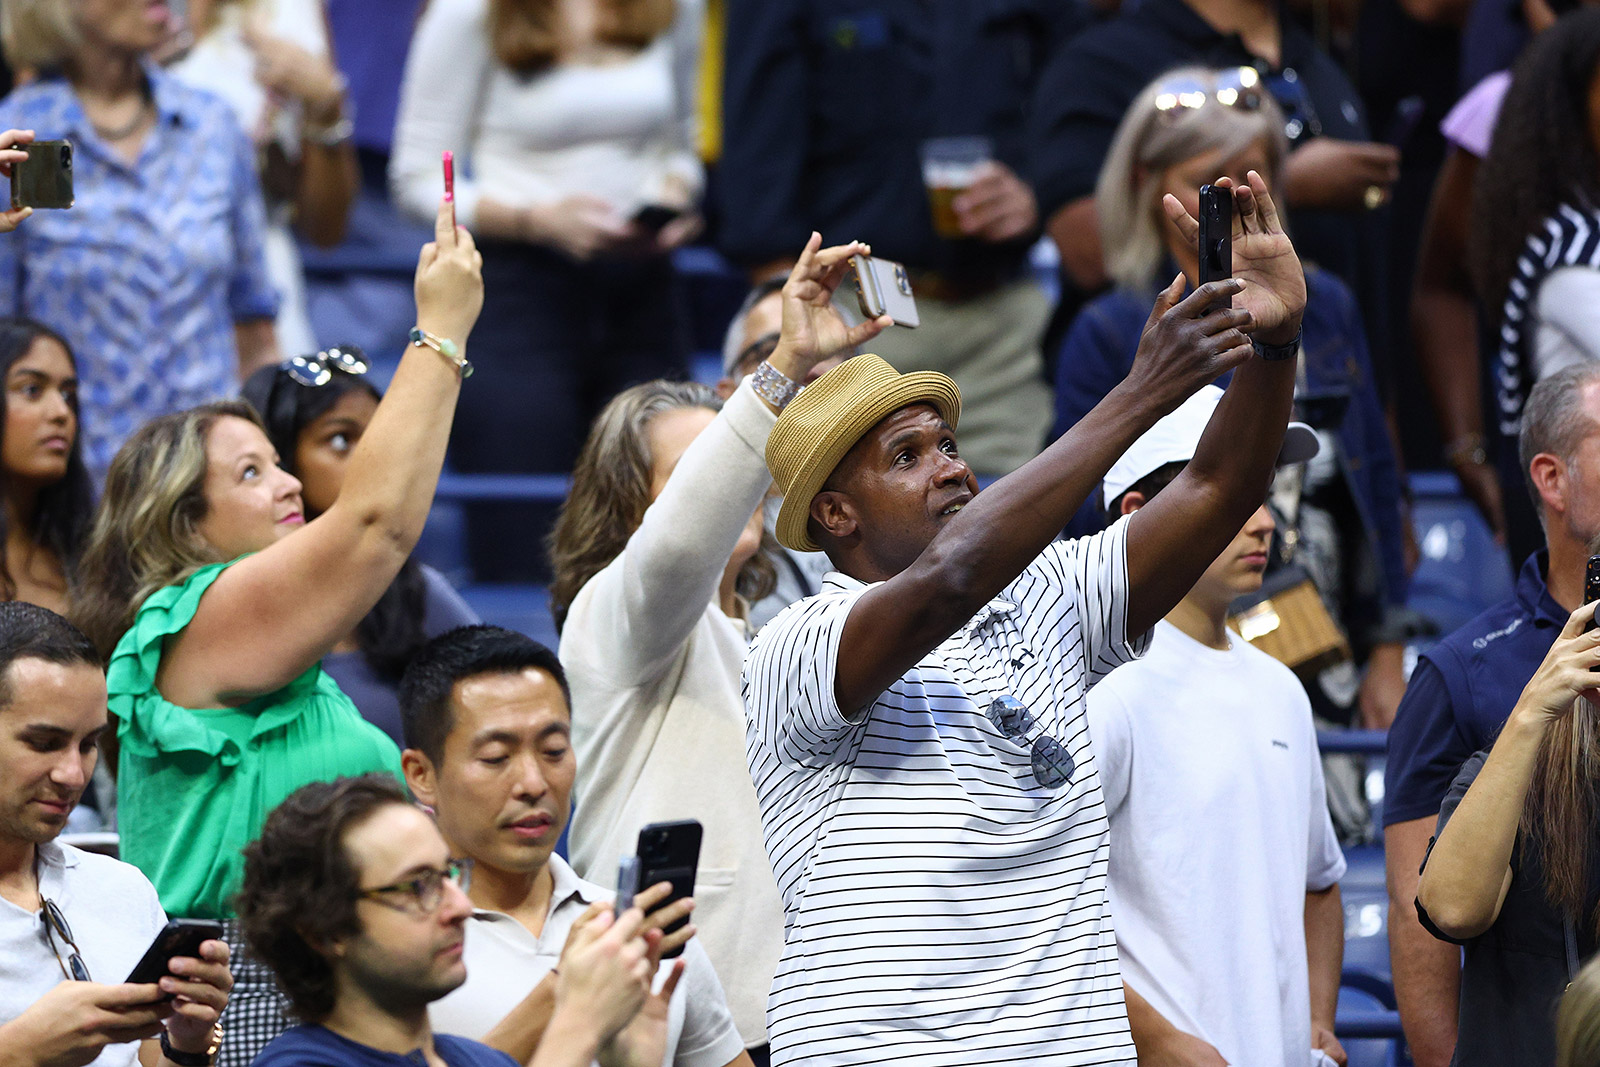 Fans watch as Serena Williams is introduced on Friday.